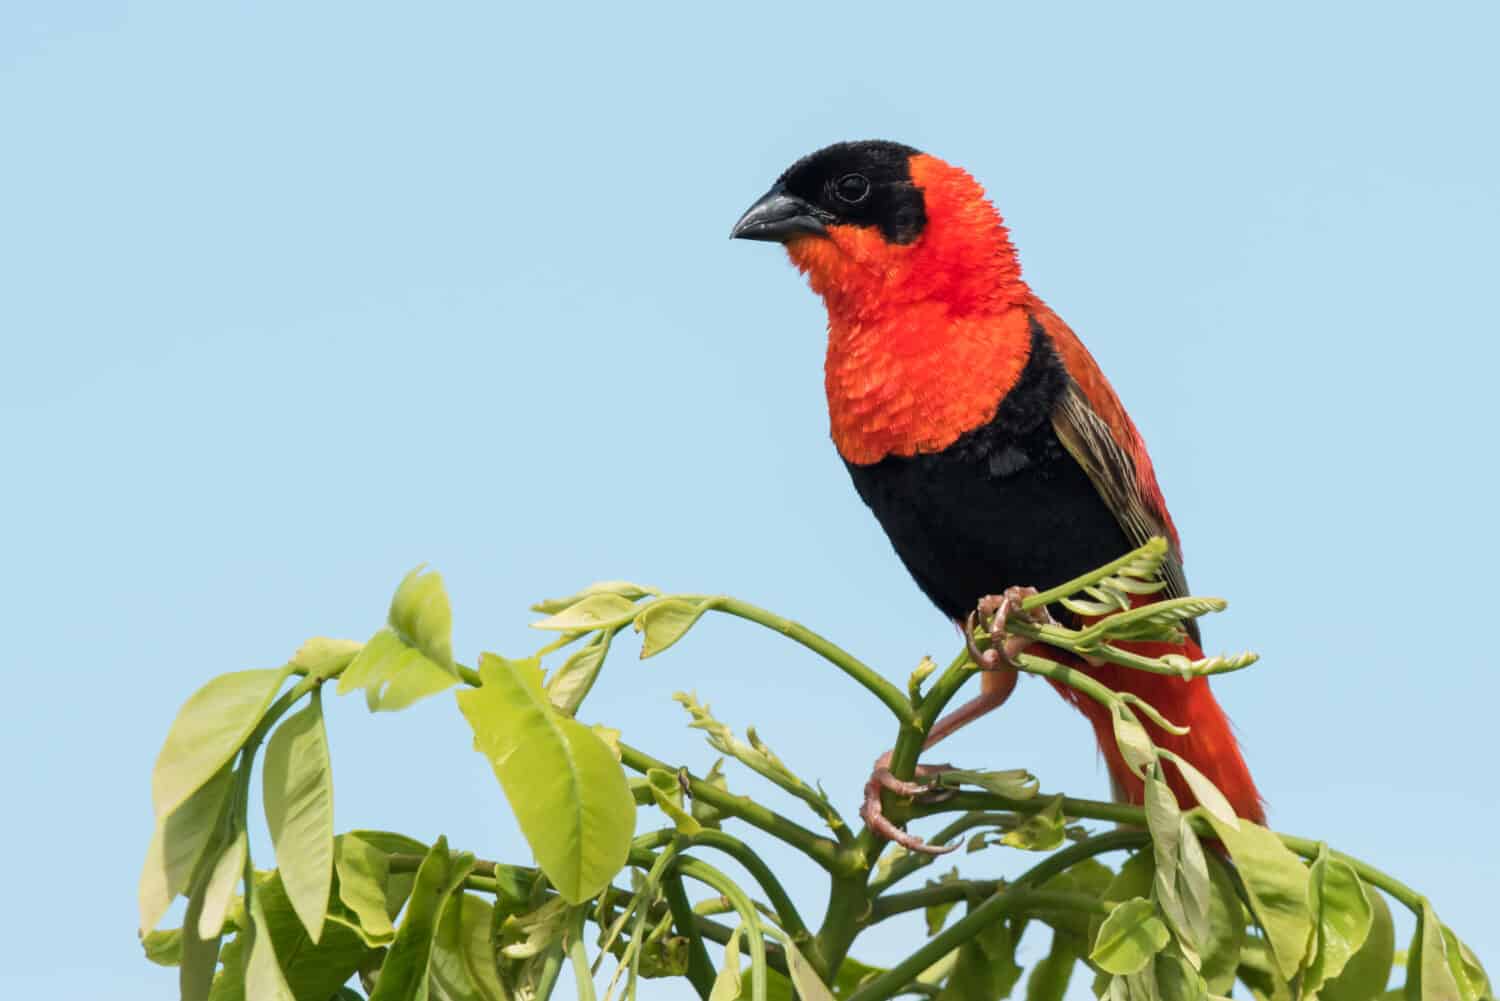 A male Northern Red Bishop (Euplectes franciscanus) in full breeding plumage